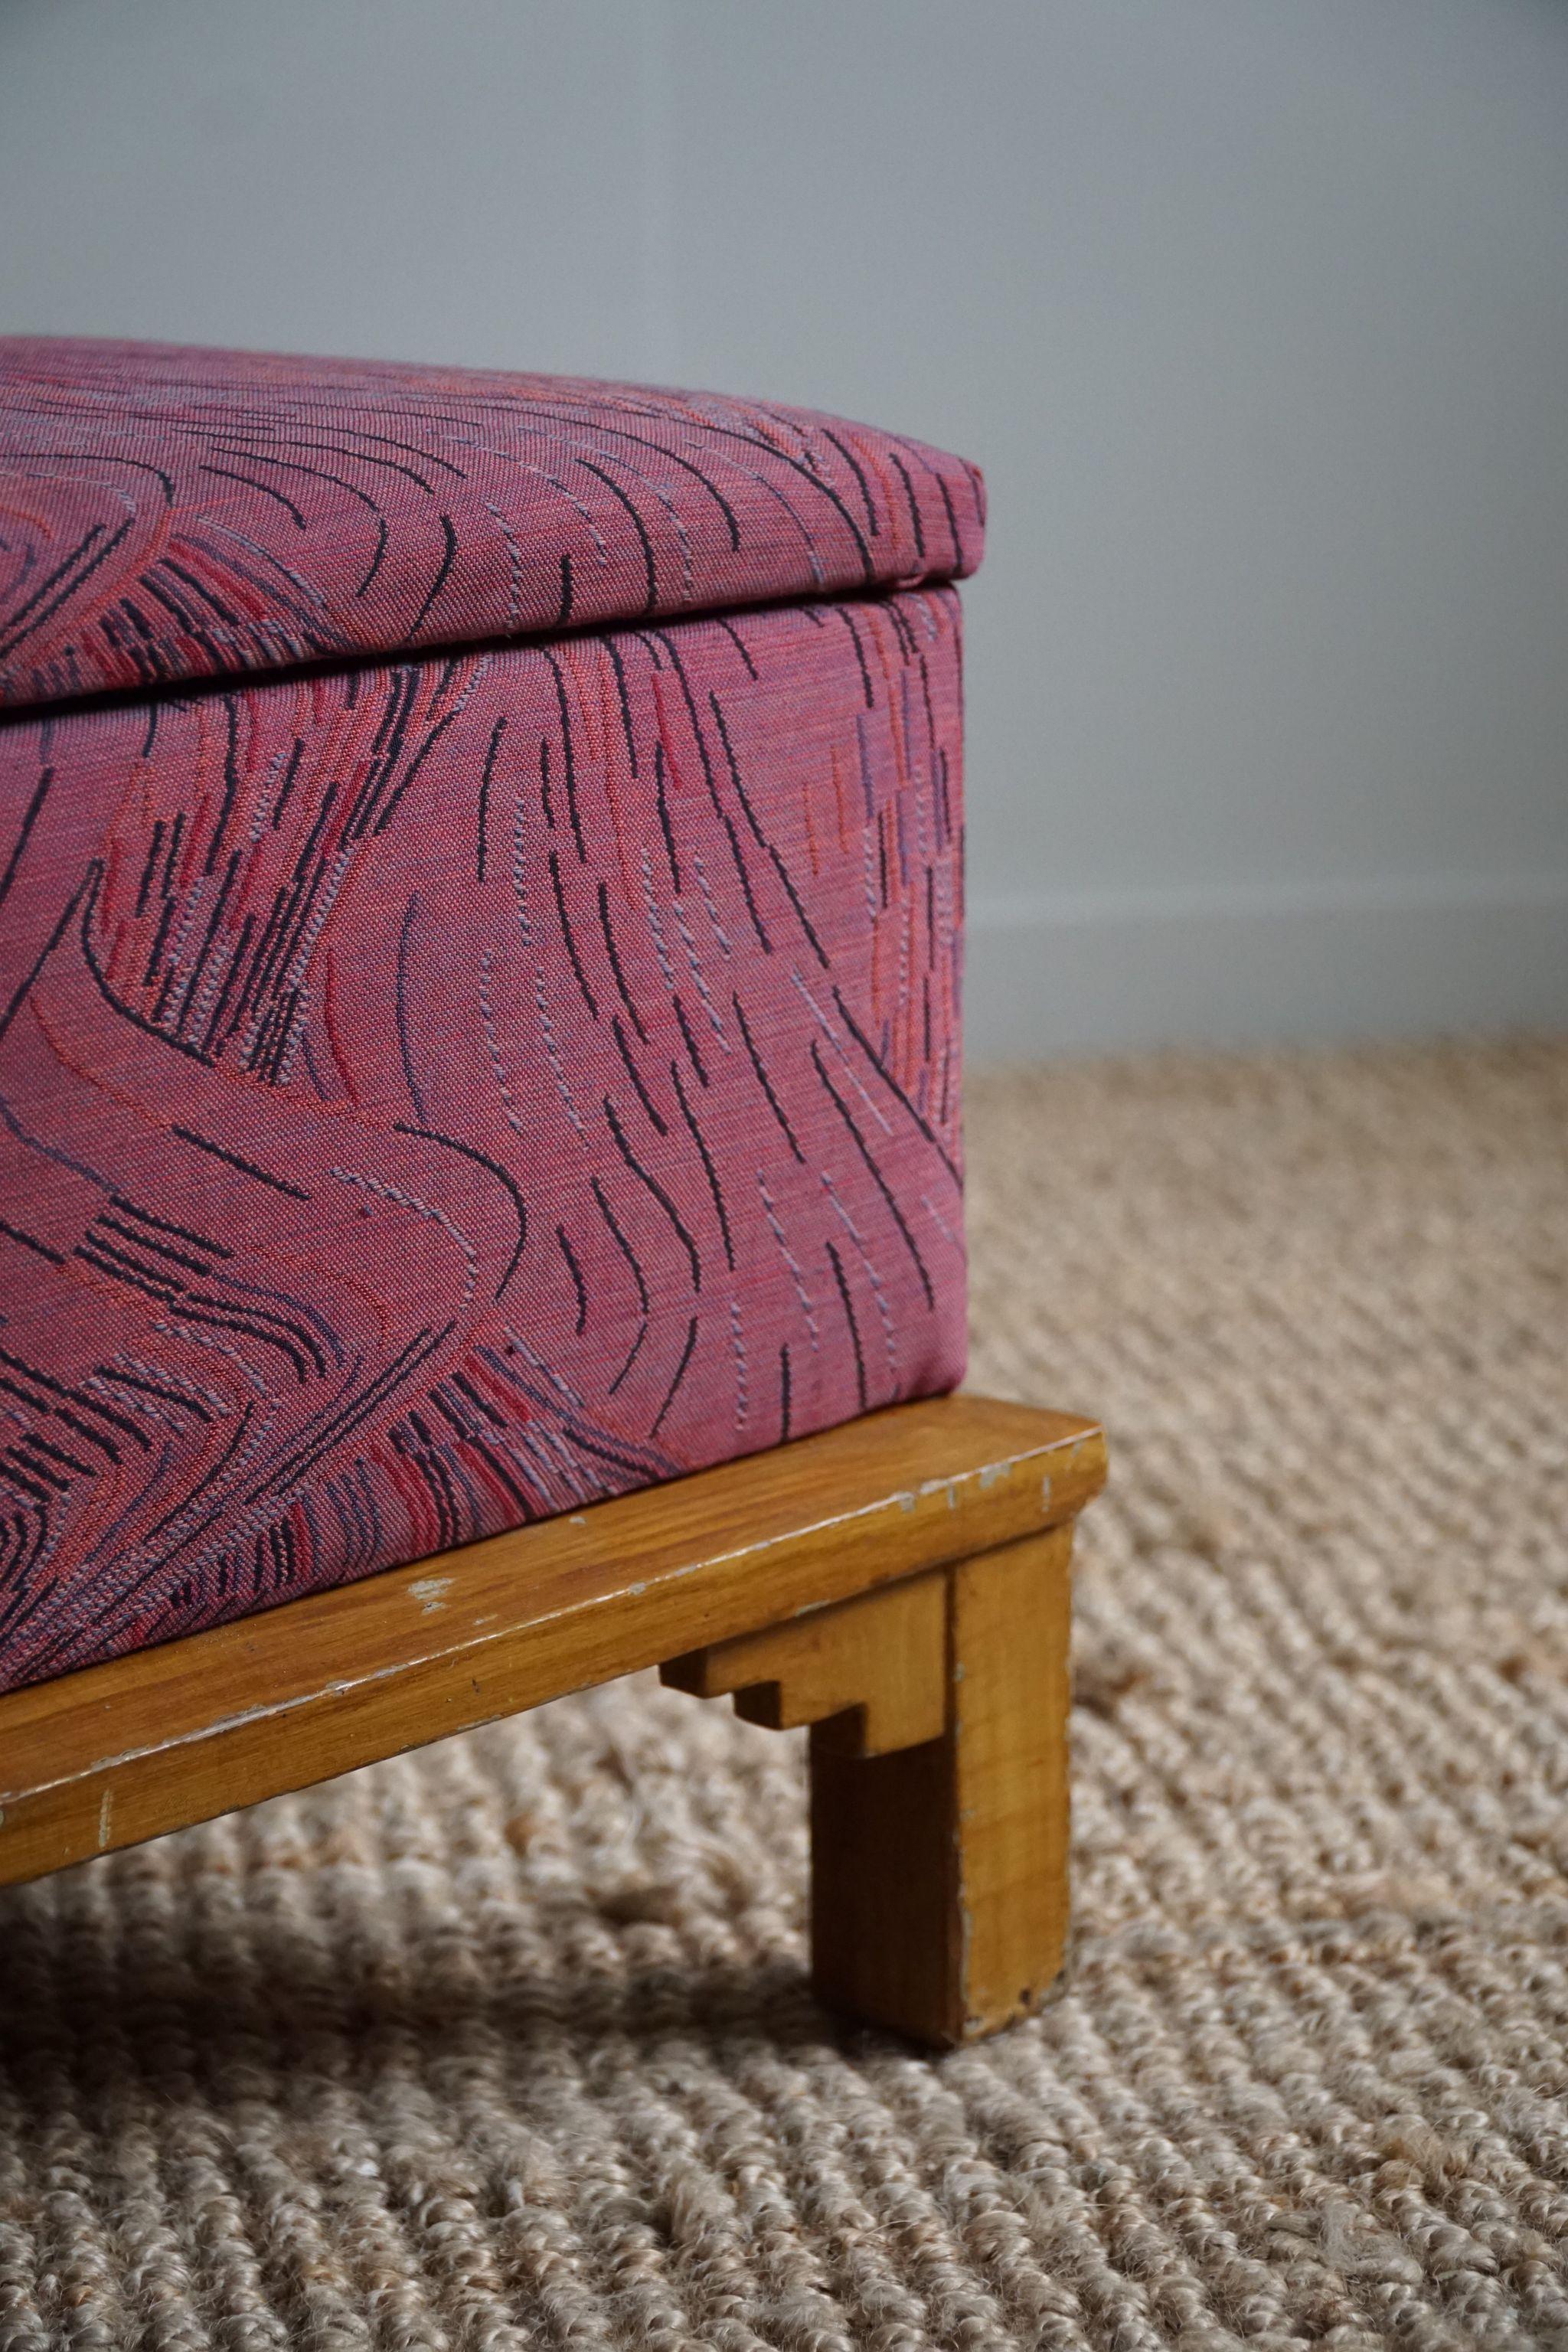 French Art Deco, Sculptural Stool with Storage, Reupholstered, Made in the 1940s For Sale 2